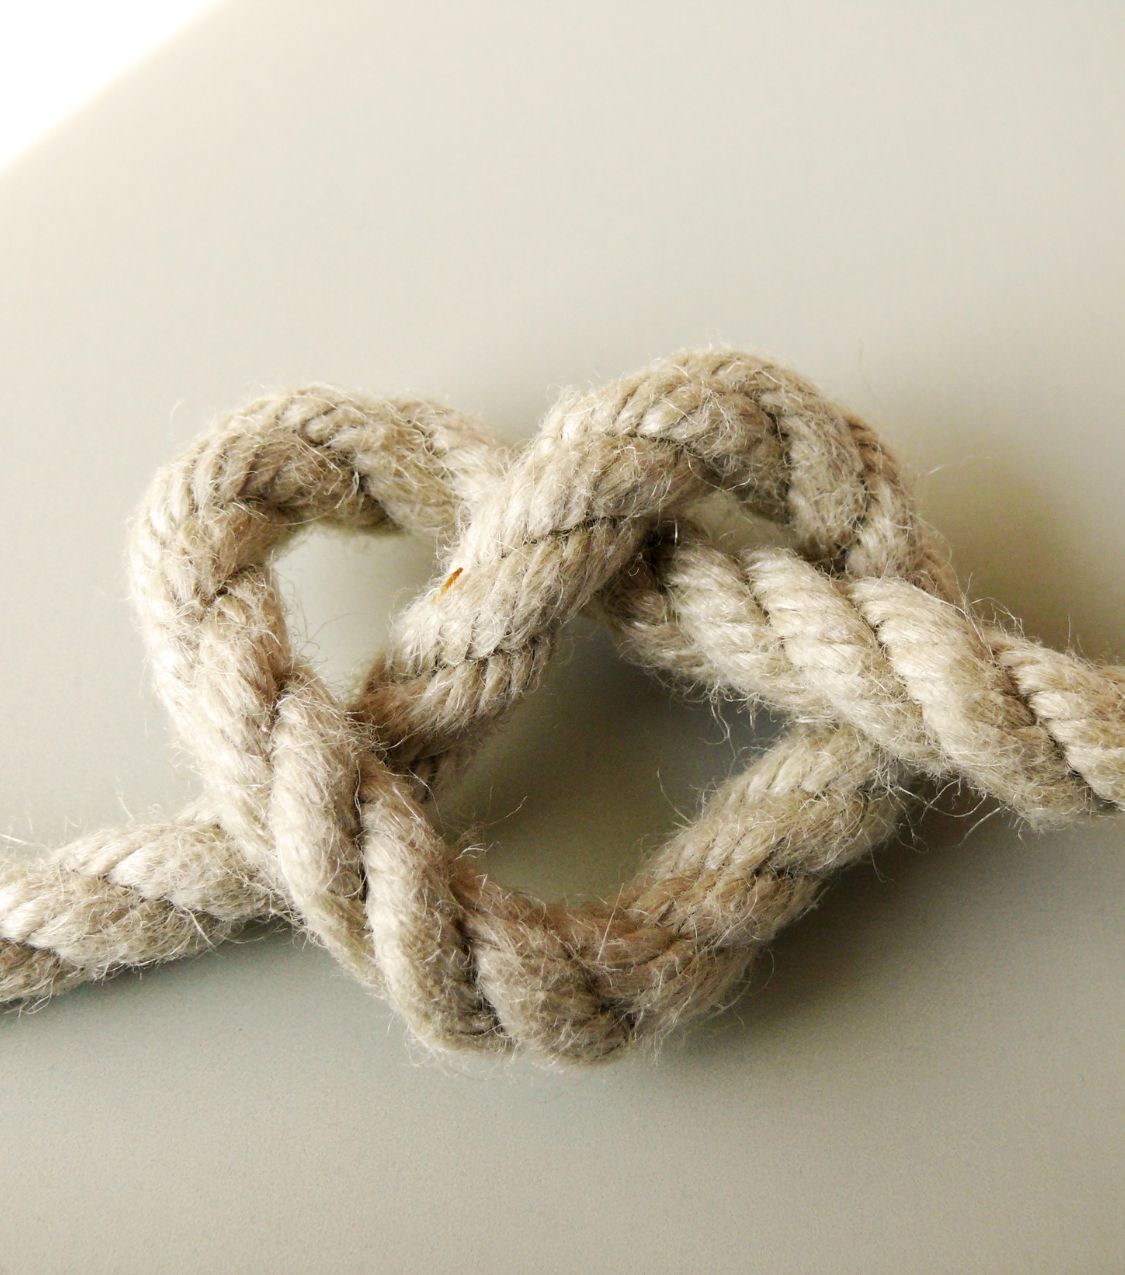 A rope tied in the shape of a heart is like the tie between love and betrayal. Showing the essence of betrayal trauma and true love. If you are suffering from betrayal trauma, contact our Relationship Experts for help today.